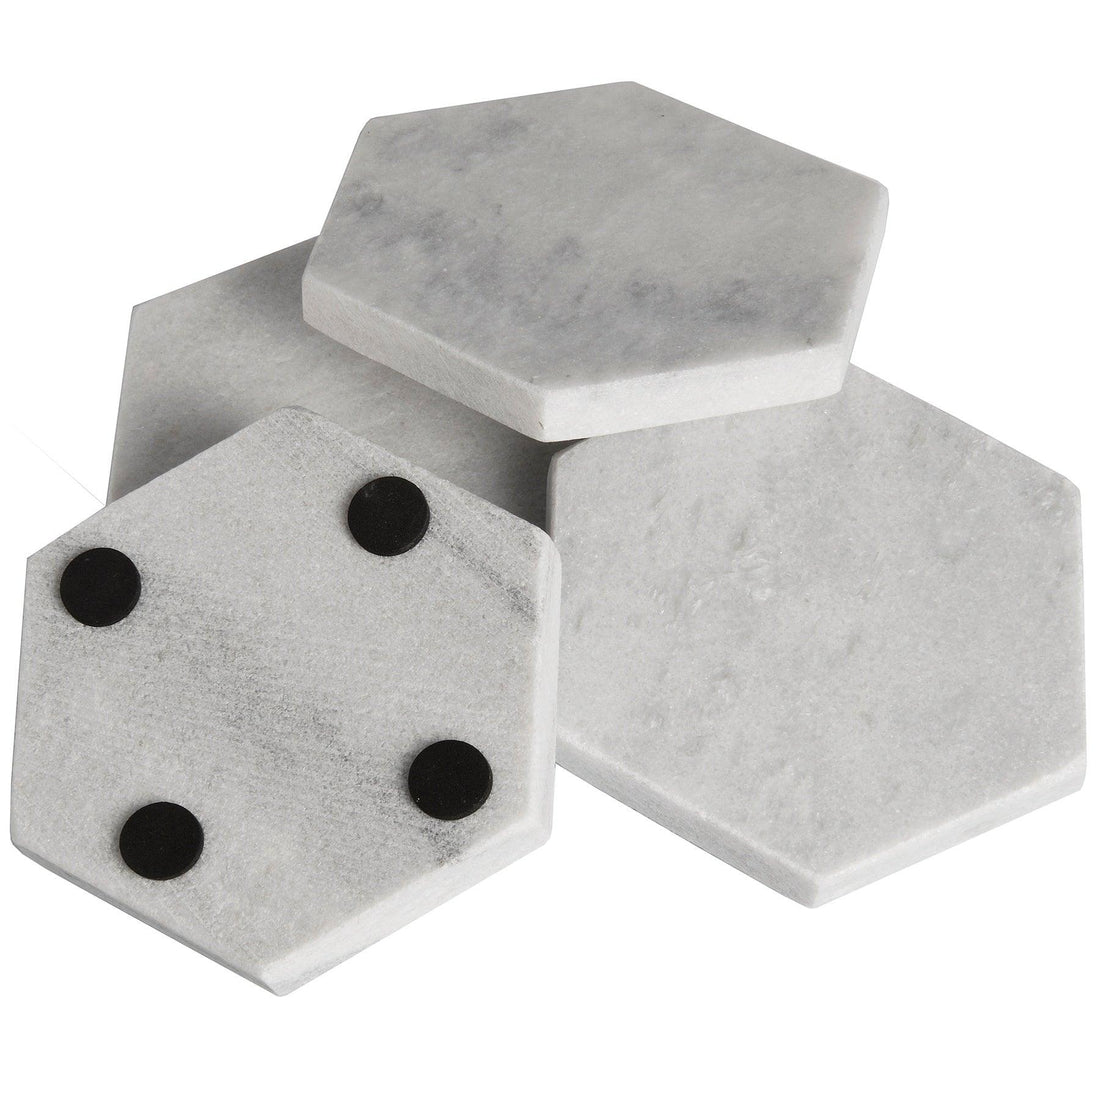 Grey Marble Hexagonal Coasters - £29.95 - Gifts & Accessories > Kitchen And Tableware 